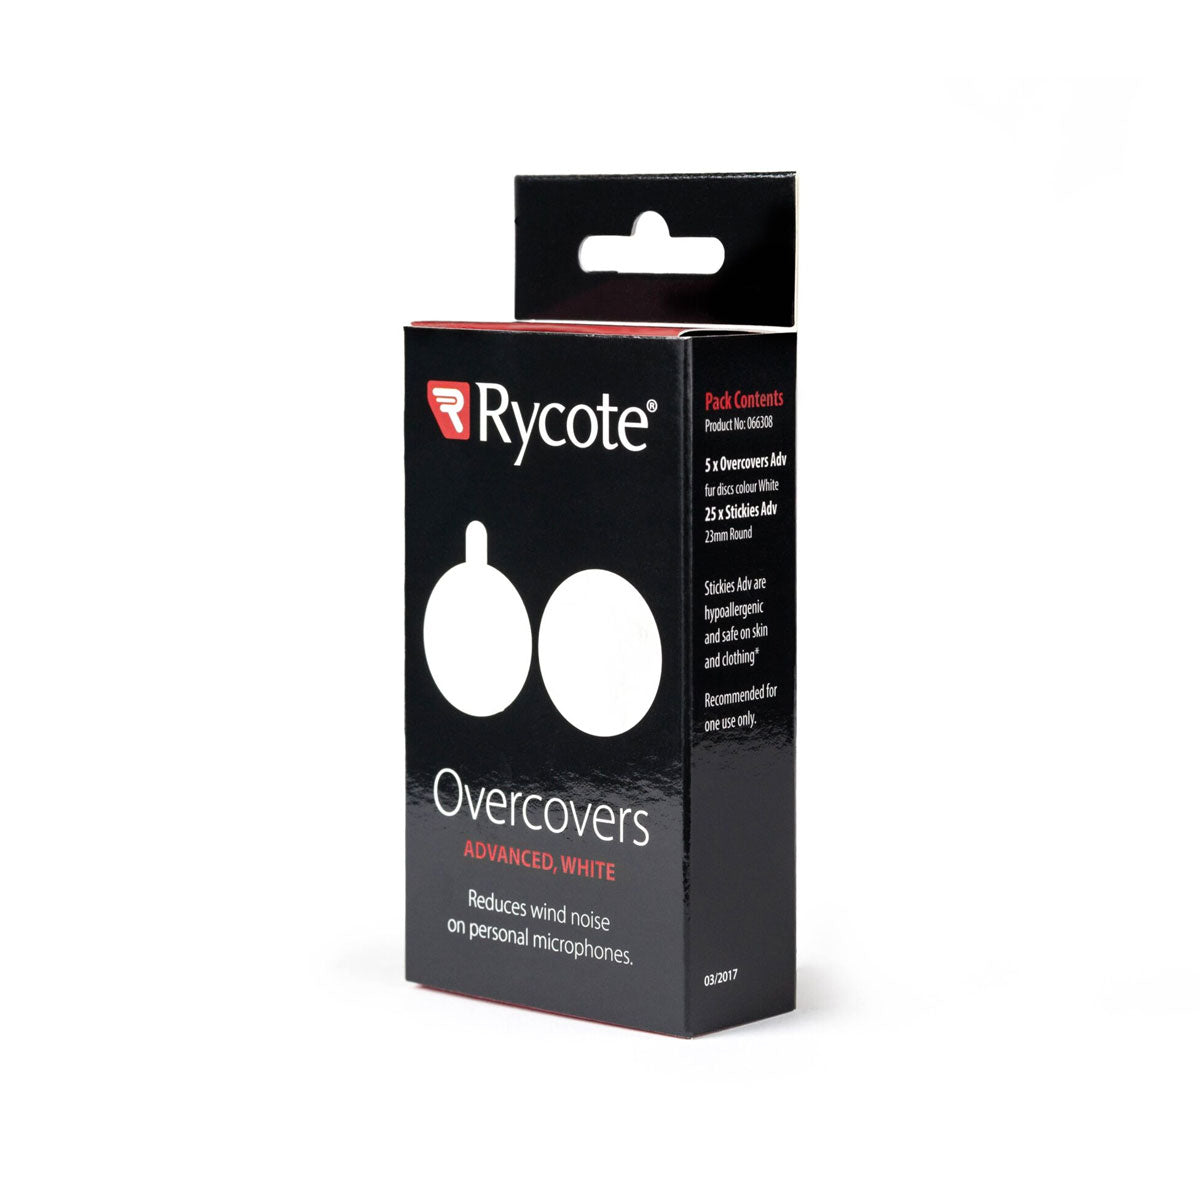 Rycote Overcovers Adv White (Pack) 25x Stickies and 5x OverCovers ADV